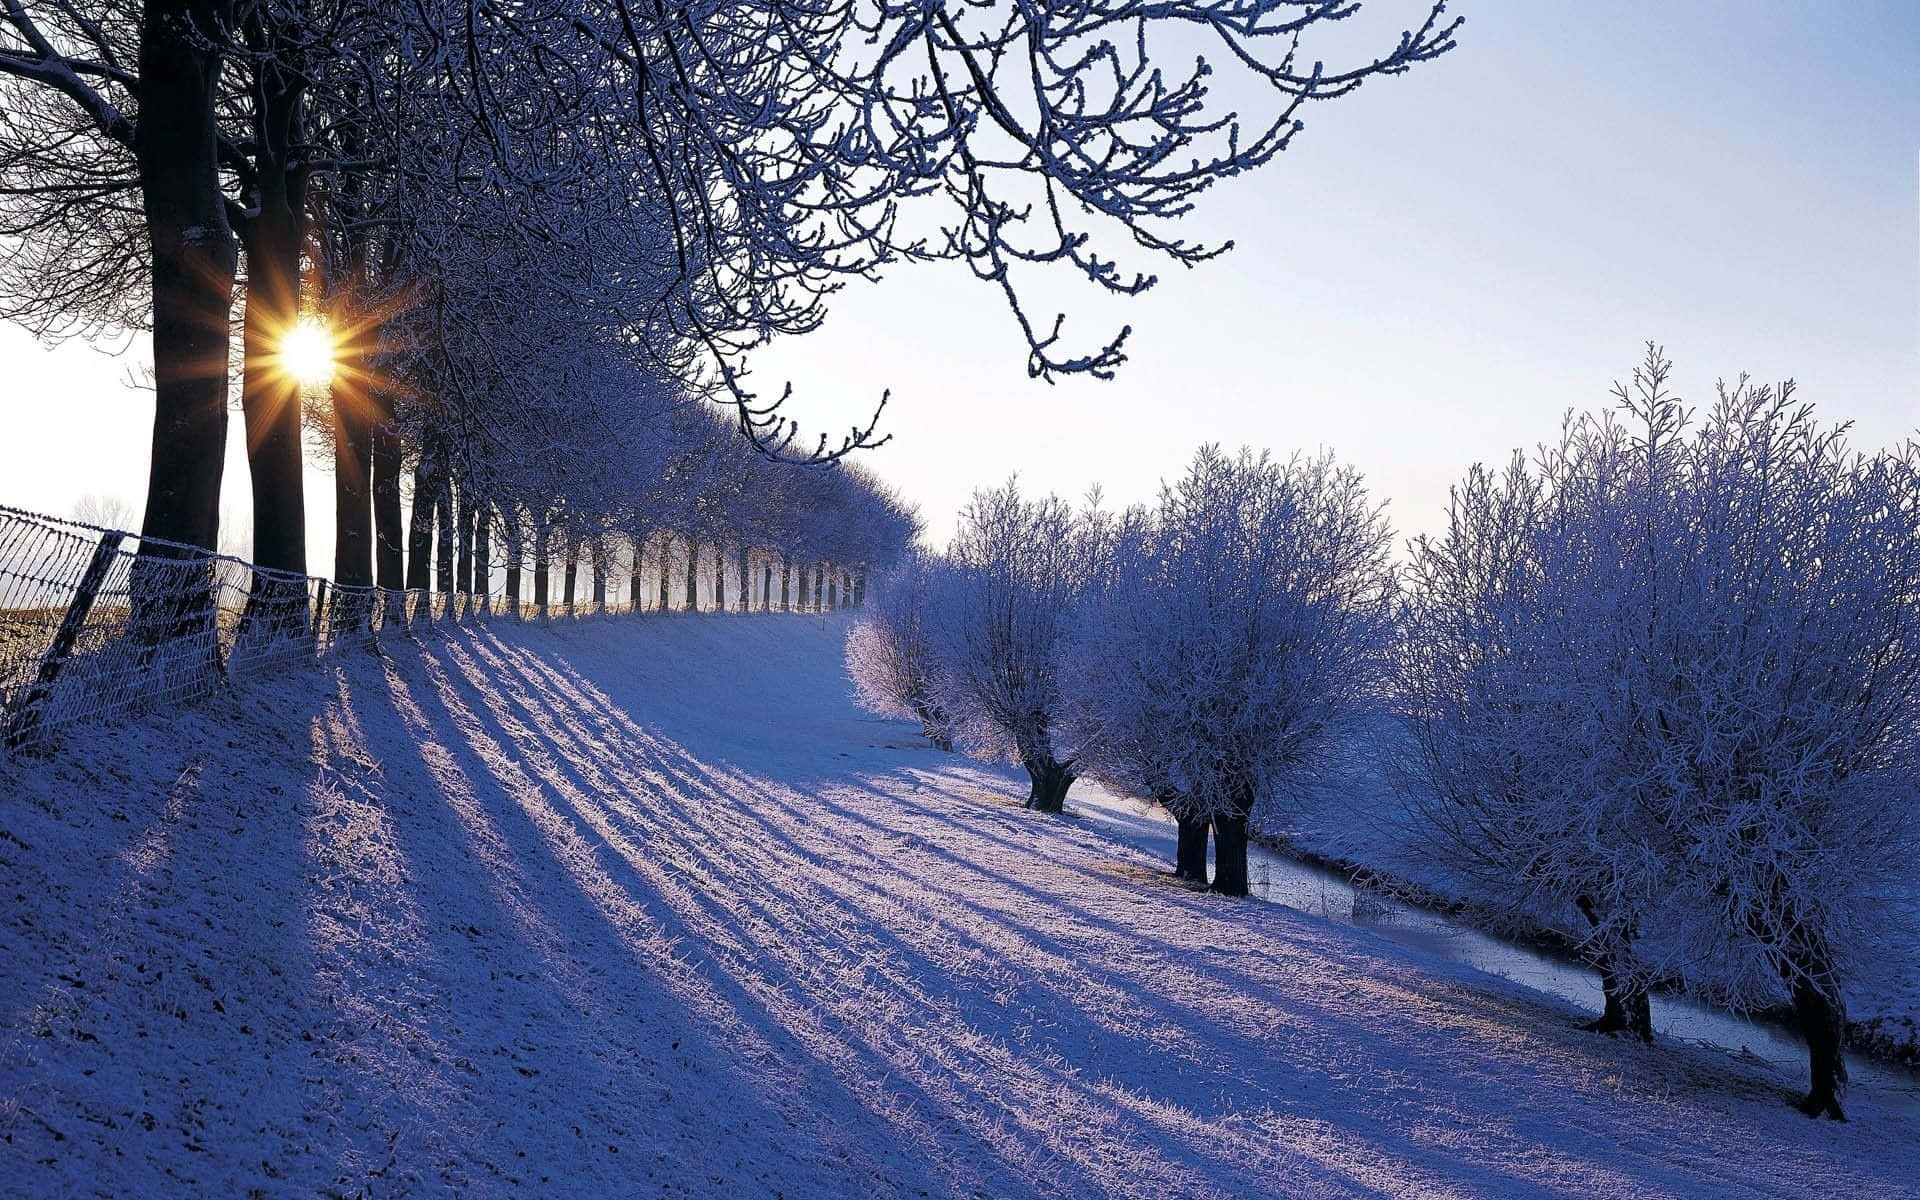 Natural Beauty--A Winter Scene that Captures the Magic of the Season